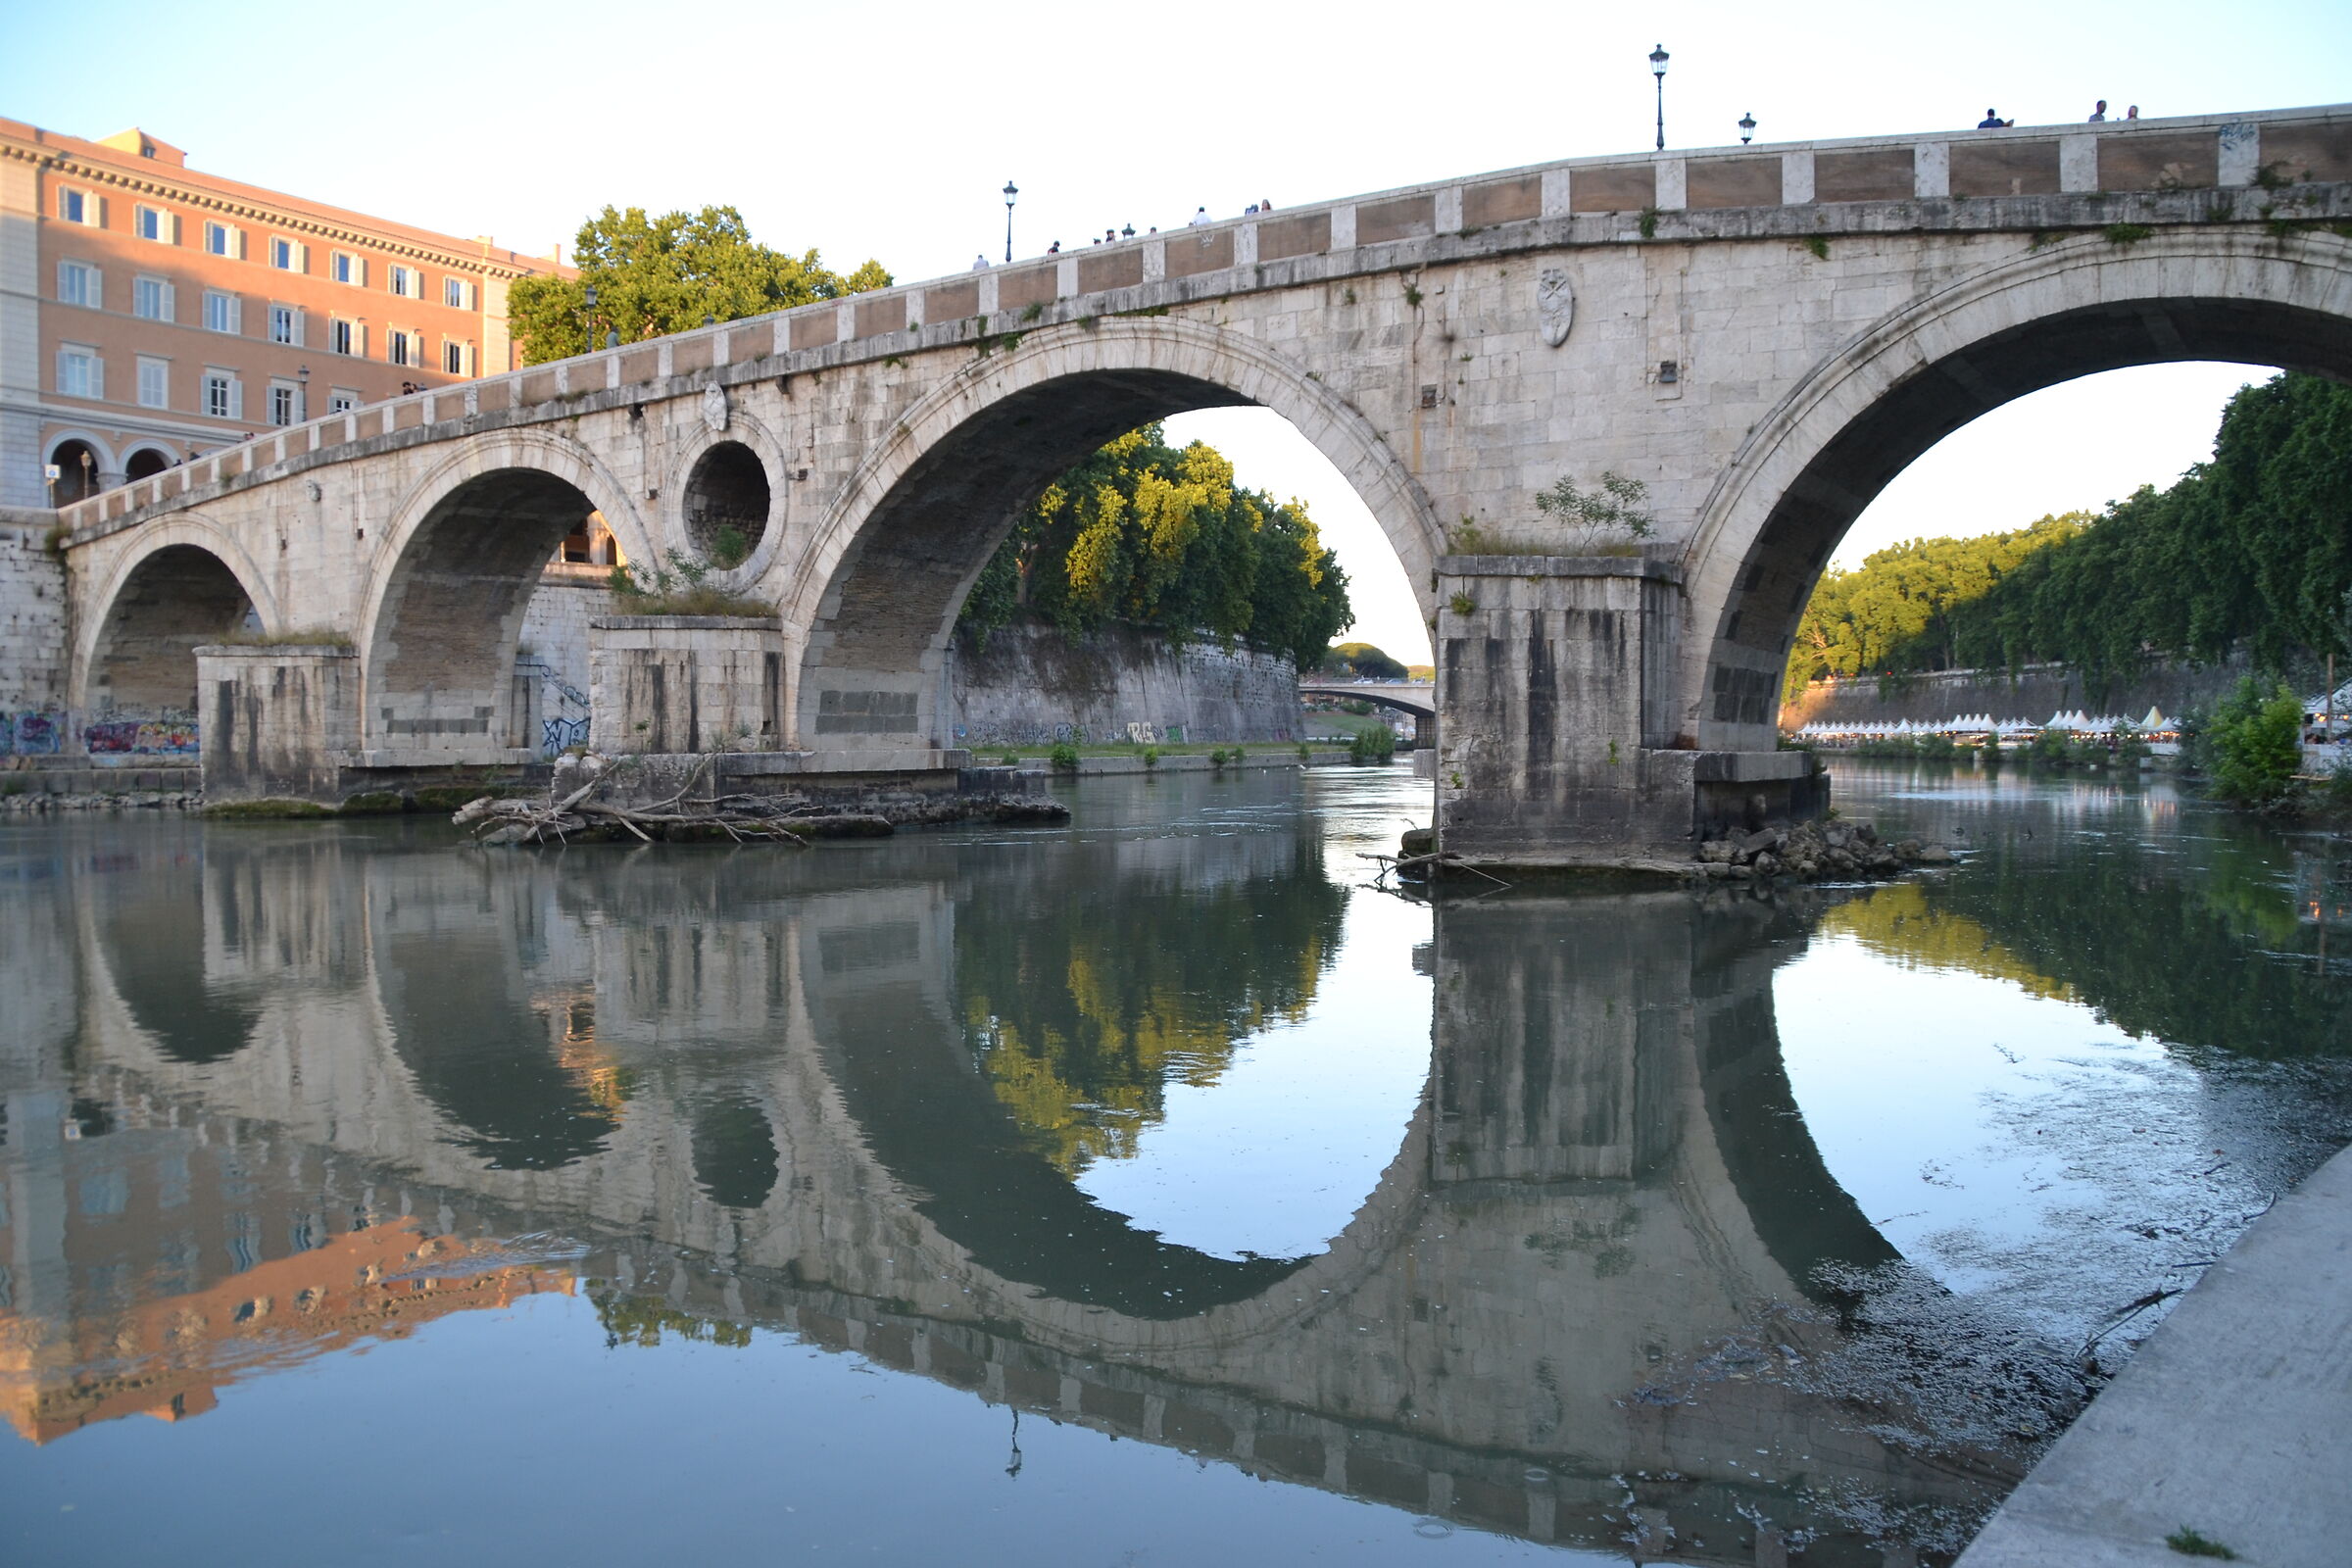 Reflections on the Tiber...